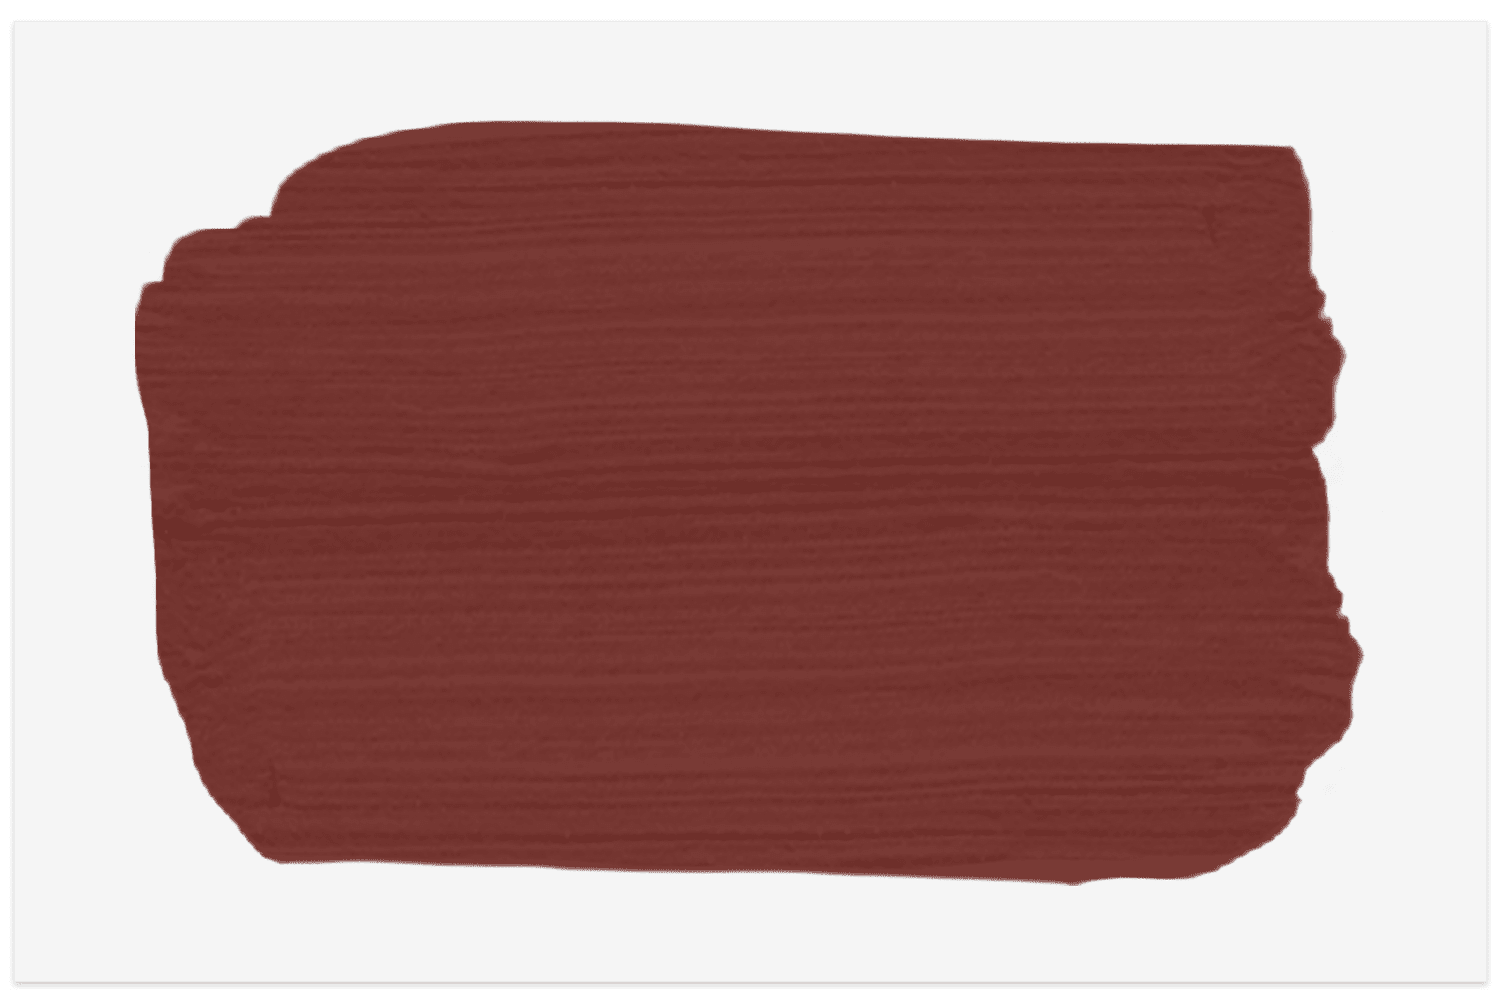 Swatch in Sundried Tomato by Benjamin Moore